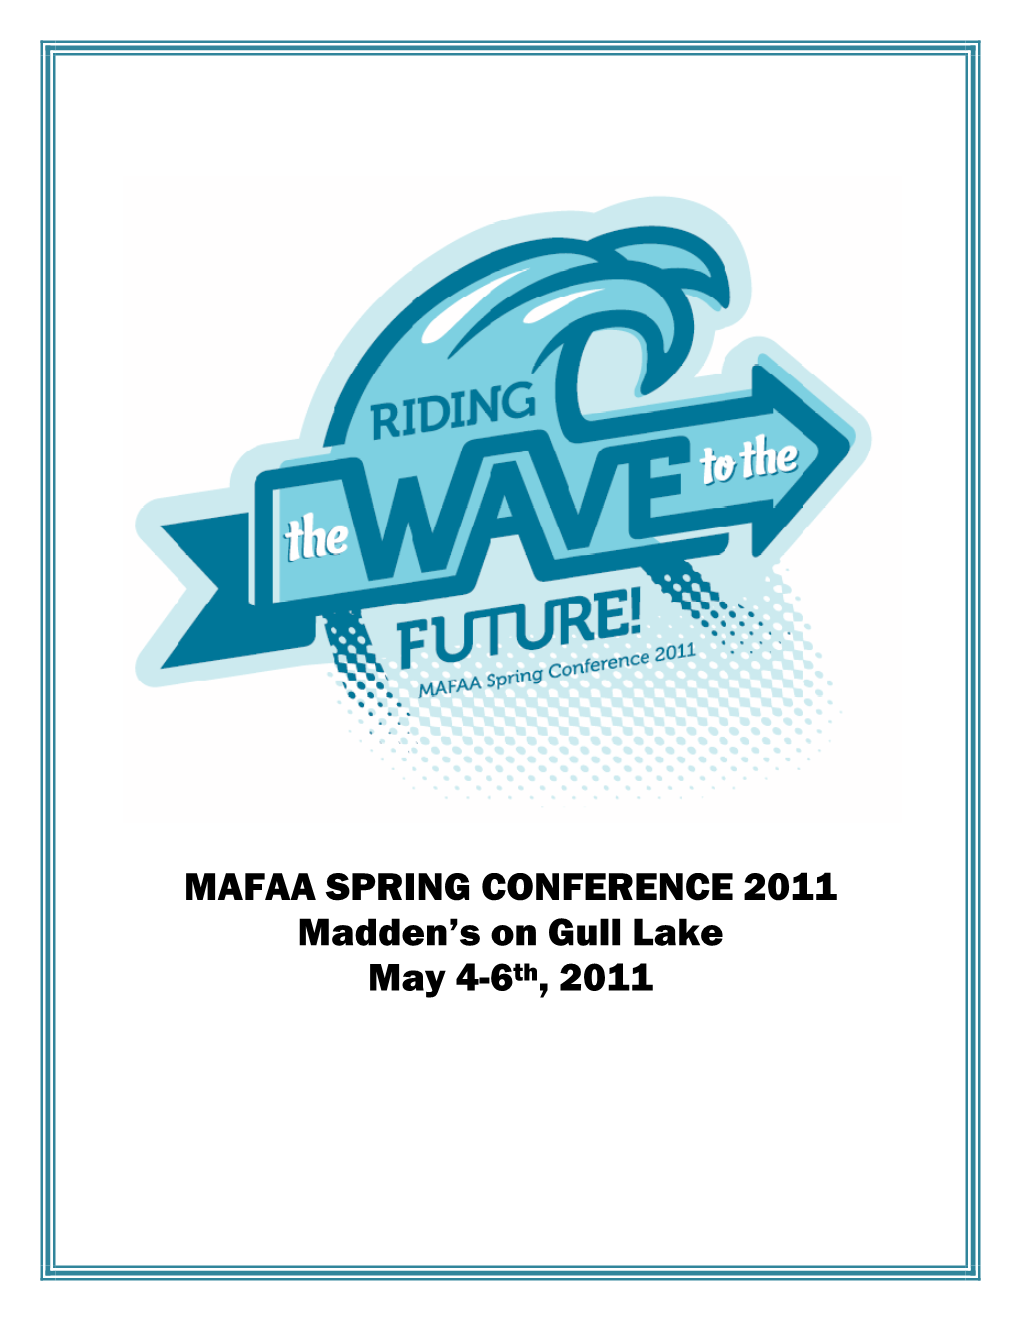 MAFAA SPRING CONFERENCE 2011 Madden's on Gull Lake May 4-6Th